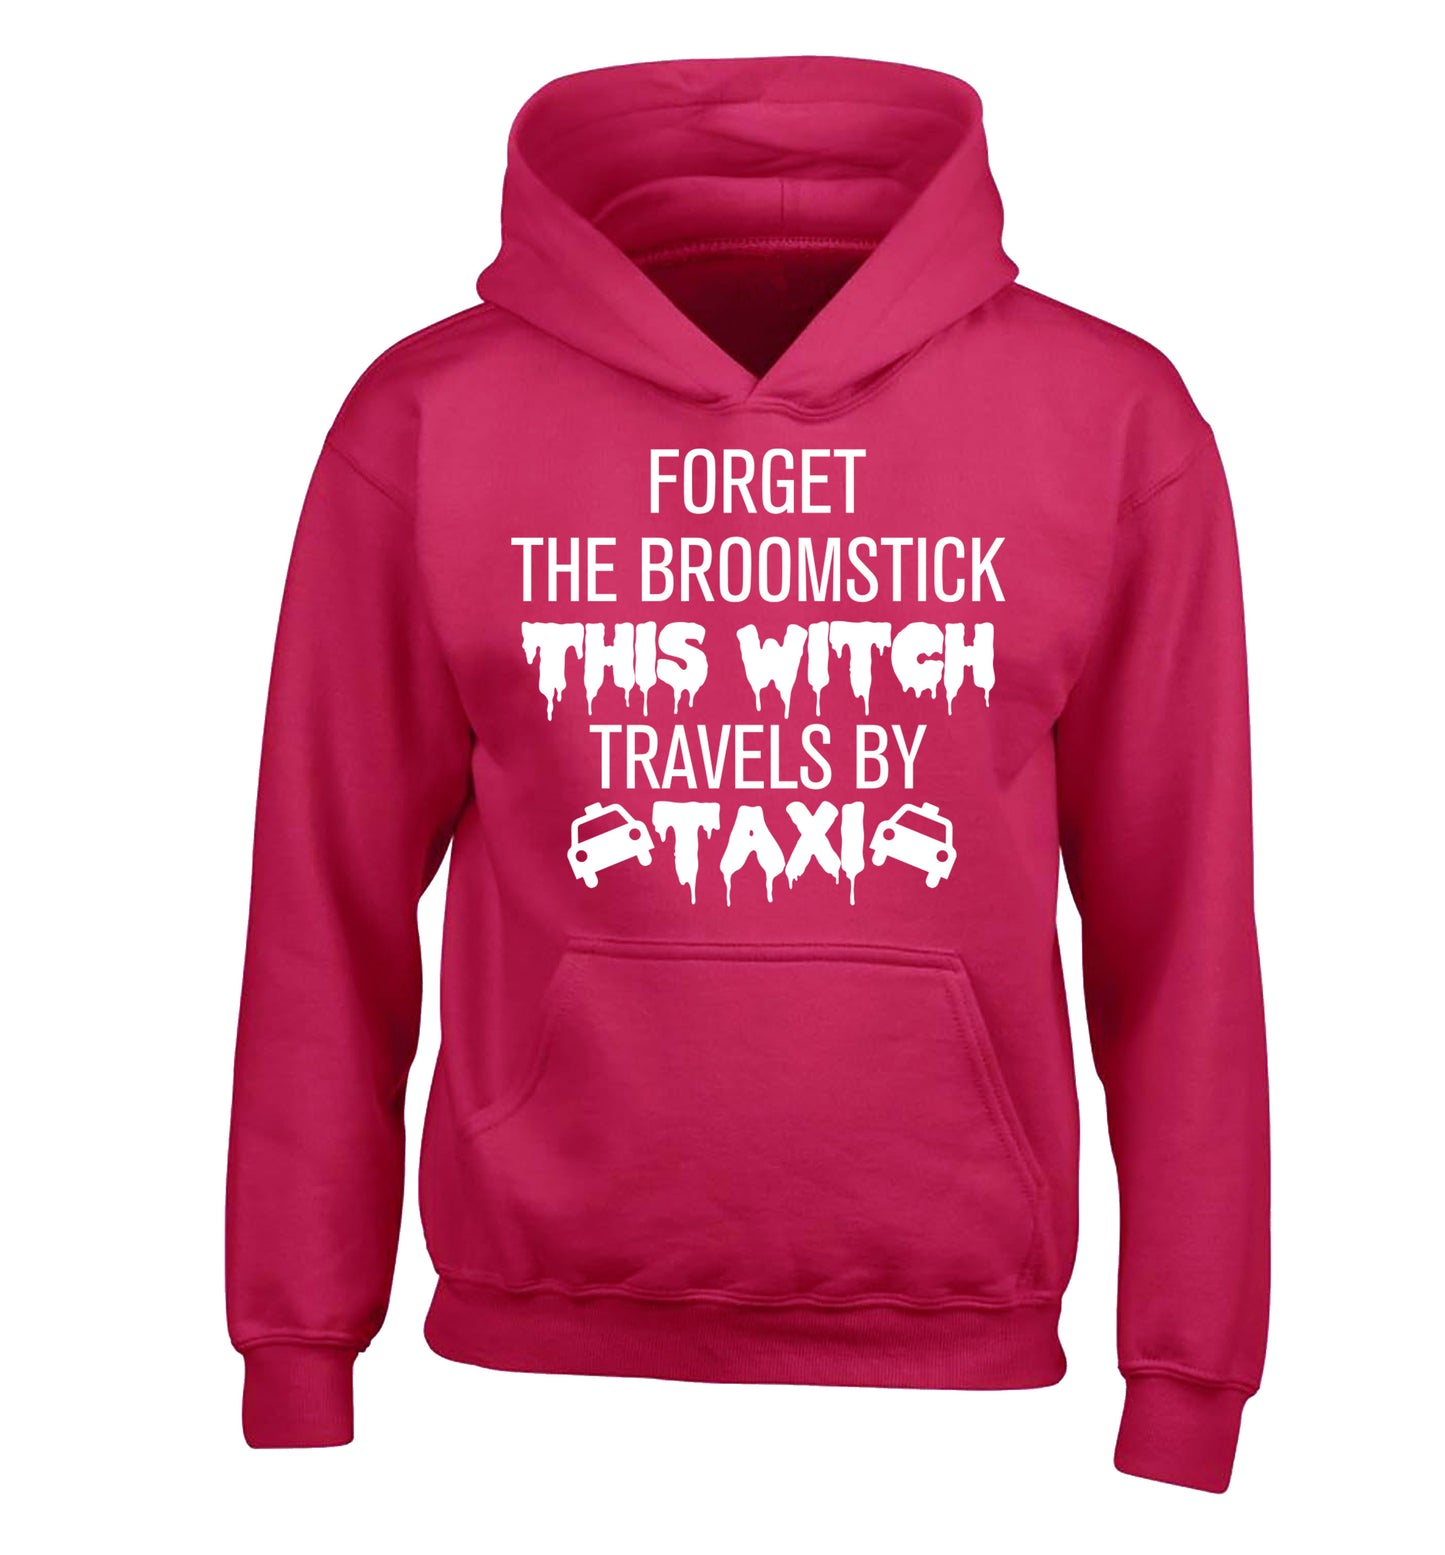 Forget the broomstick this witch travels by taxi children's pink hoodie 12-14 Years